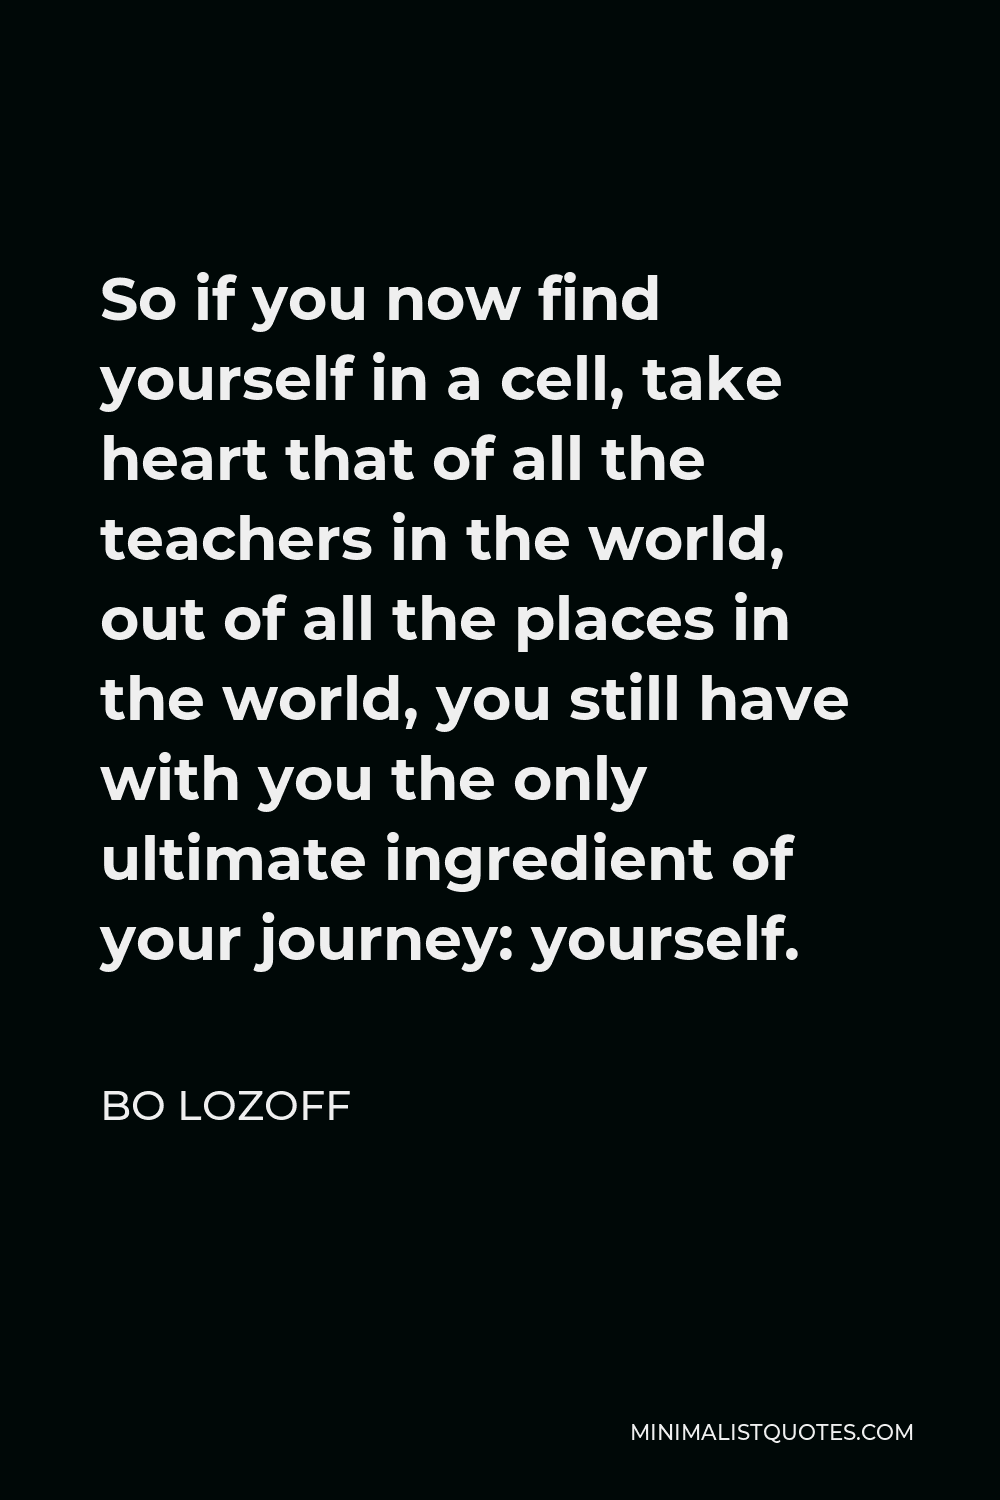 Bo Lozoff Quote - So if you now find yourself in a cell, take heart that of all the teachers in the world, out of all the places in the world, you still have with you the only ultimate ingredient of your journey: yourself.